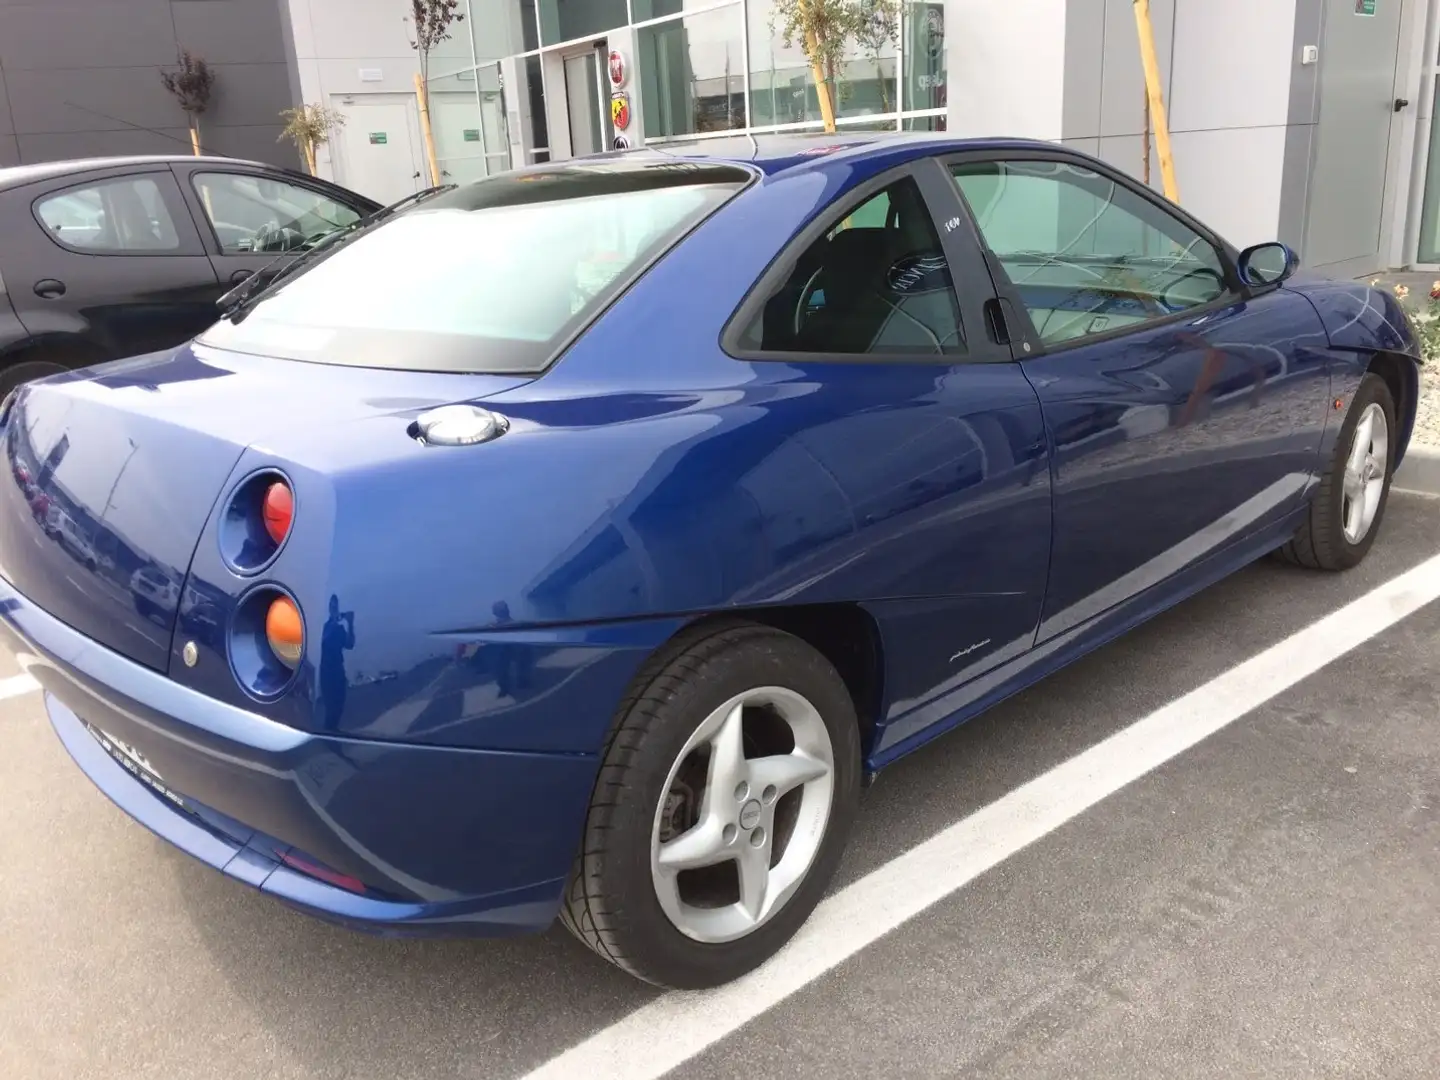 Fiat Coupe Coupe 1.8 16v c/abs,AC,CL Blu/Azzurro - 2